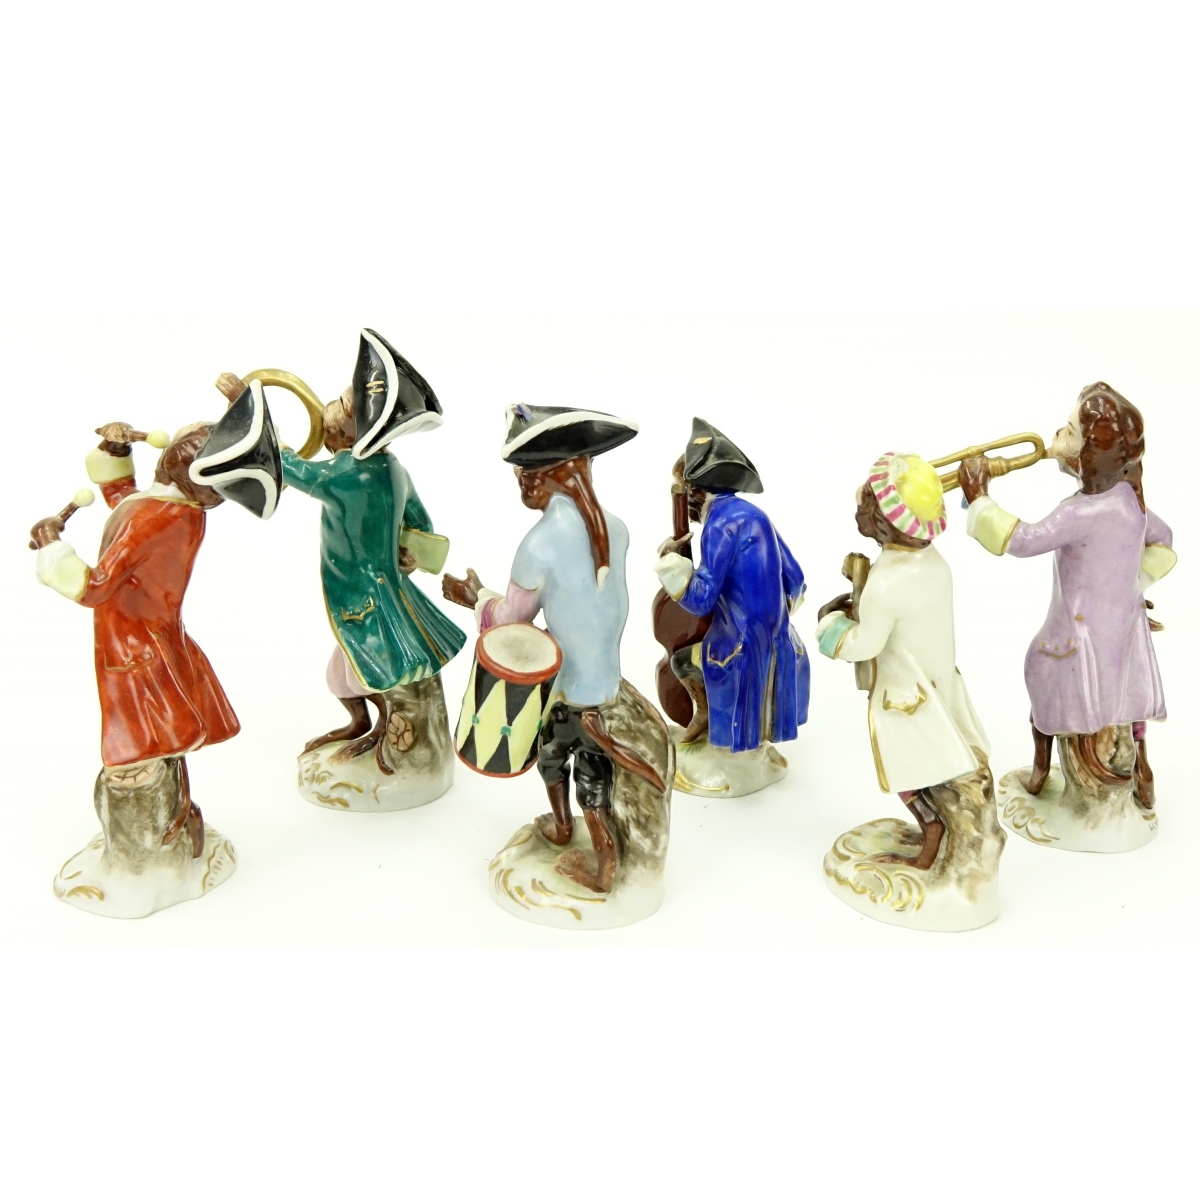 Grouping of Six German and Capodimonte Figurines